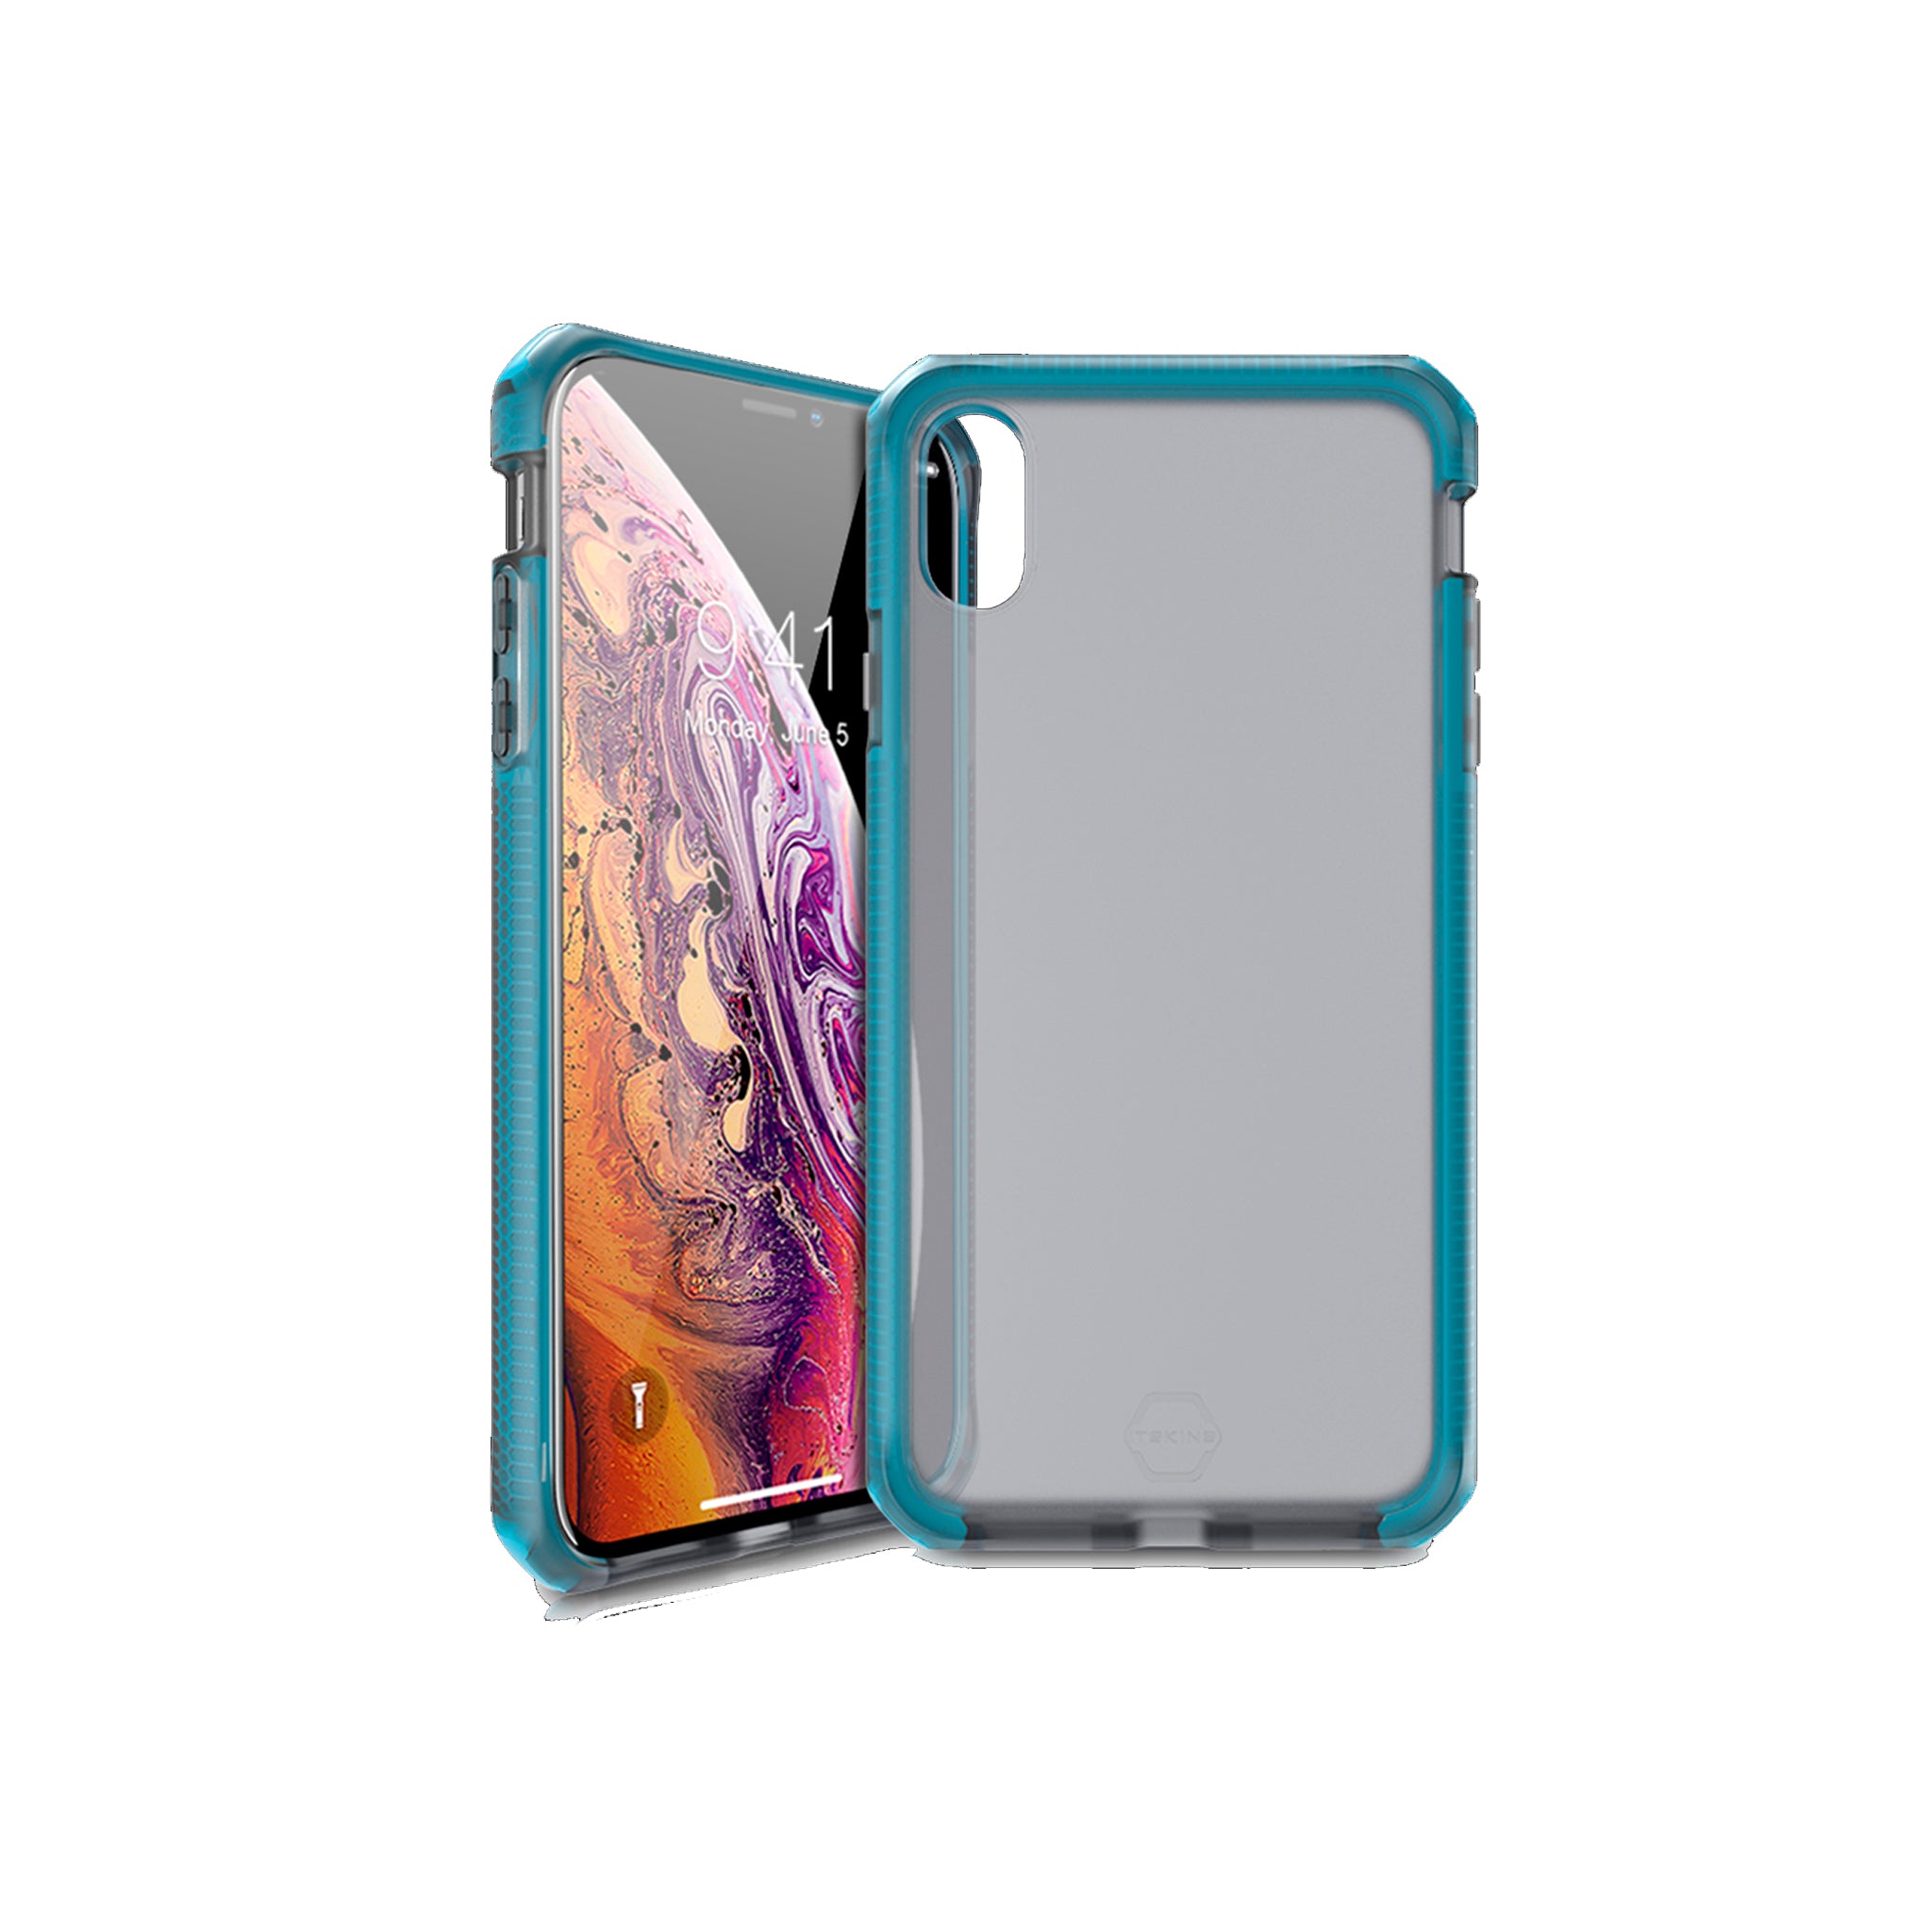 Itskins - Supreme Frost Case For Apple Iphone Xs / X - Centurion Blue And Black